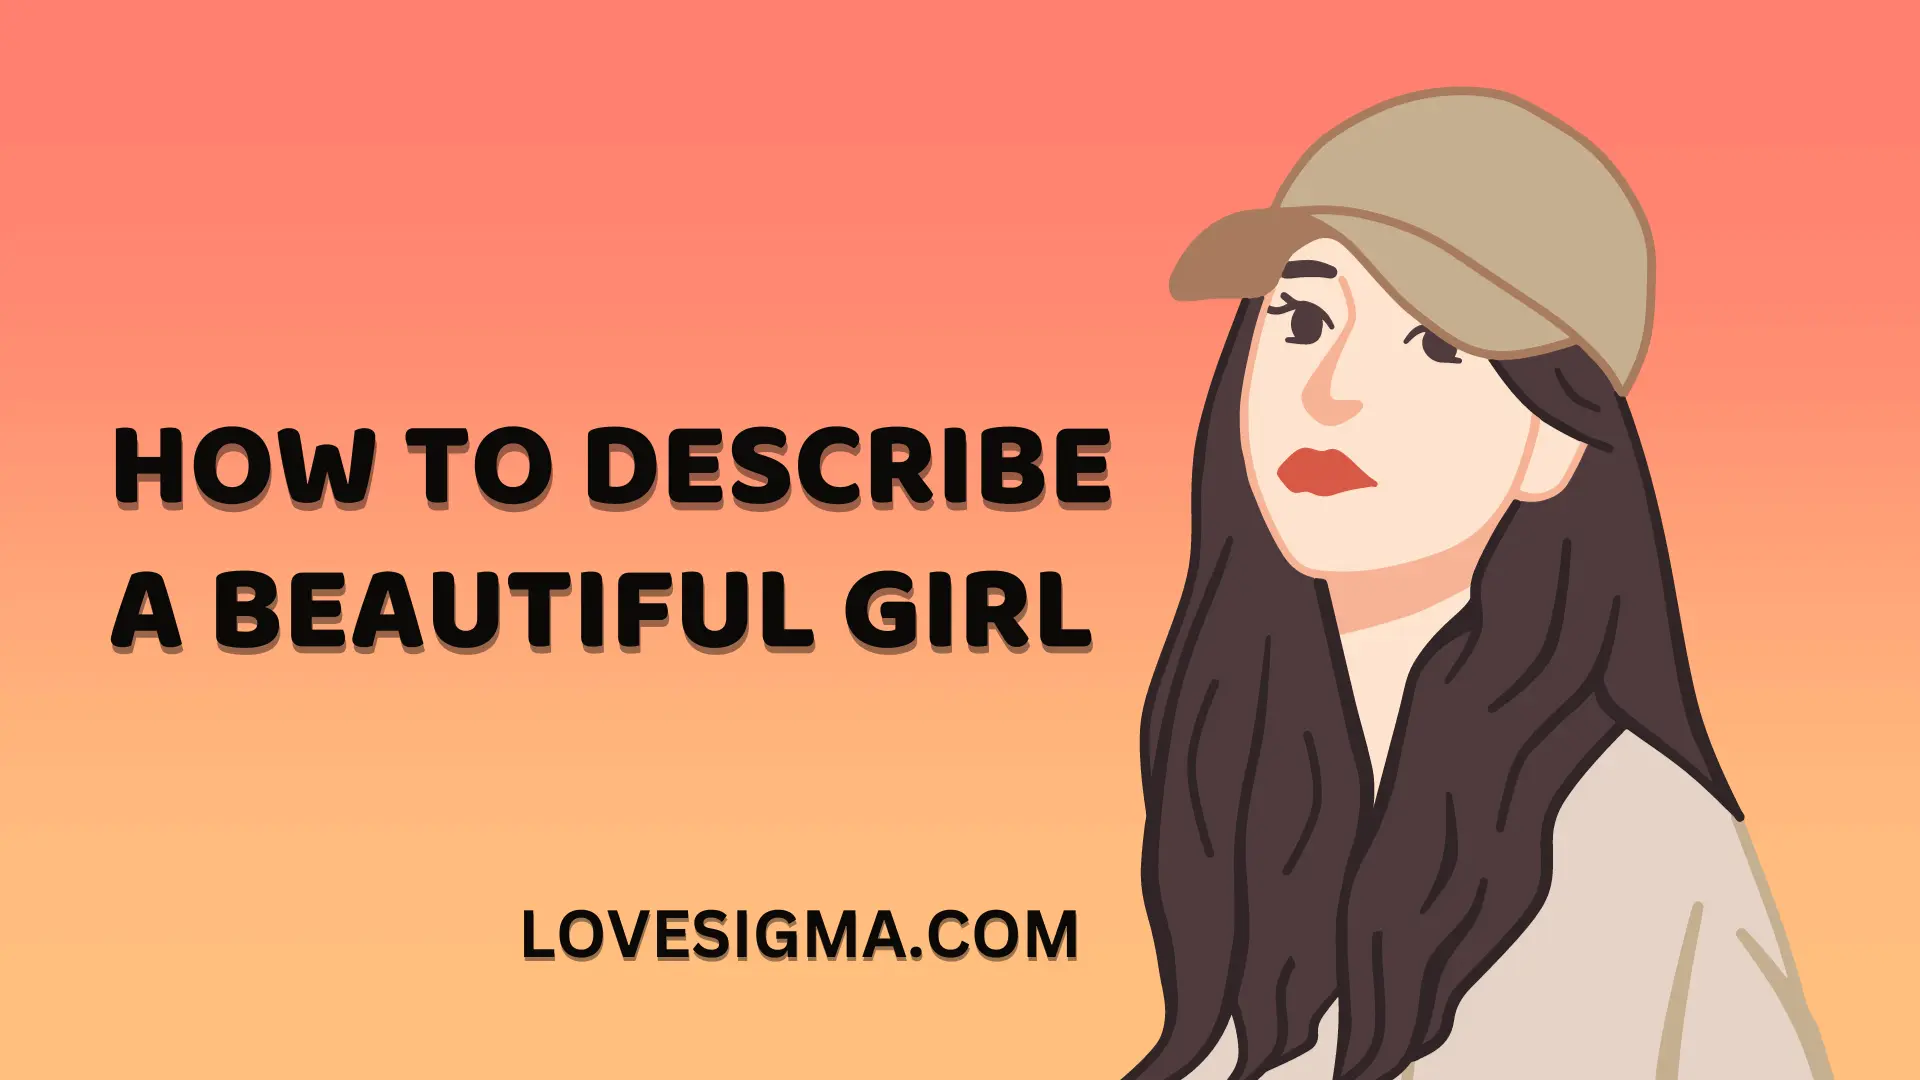 How To Describe A Beautiful Girl